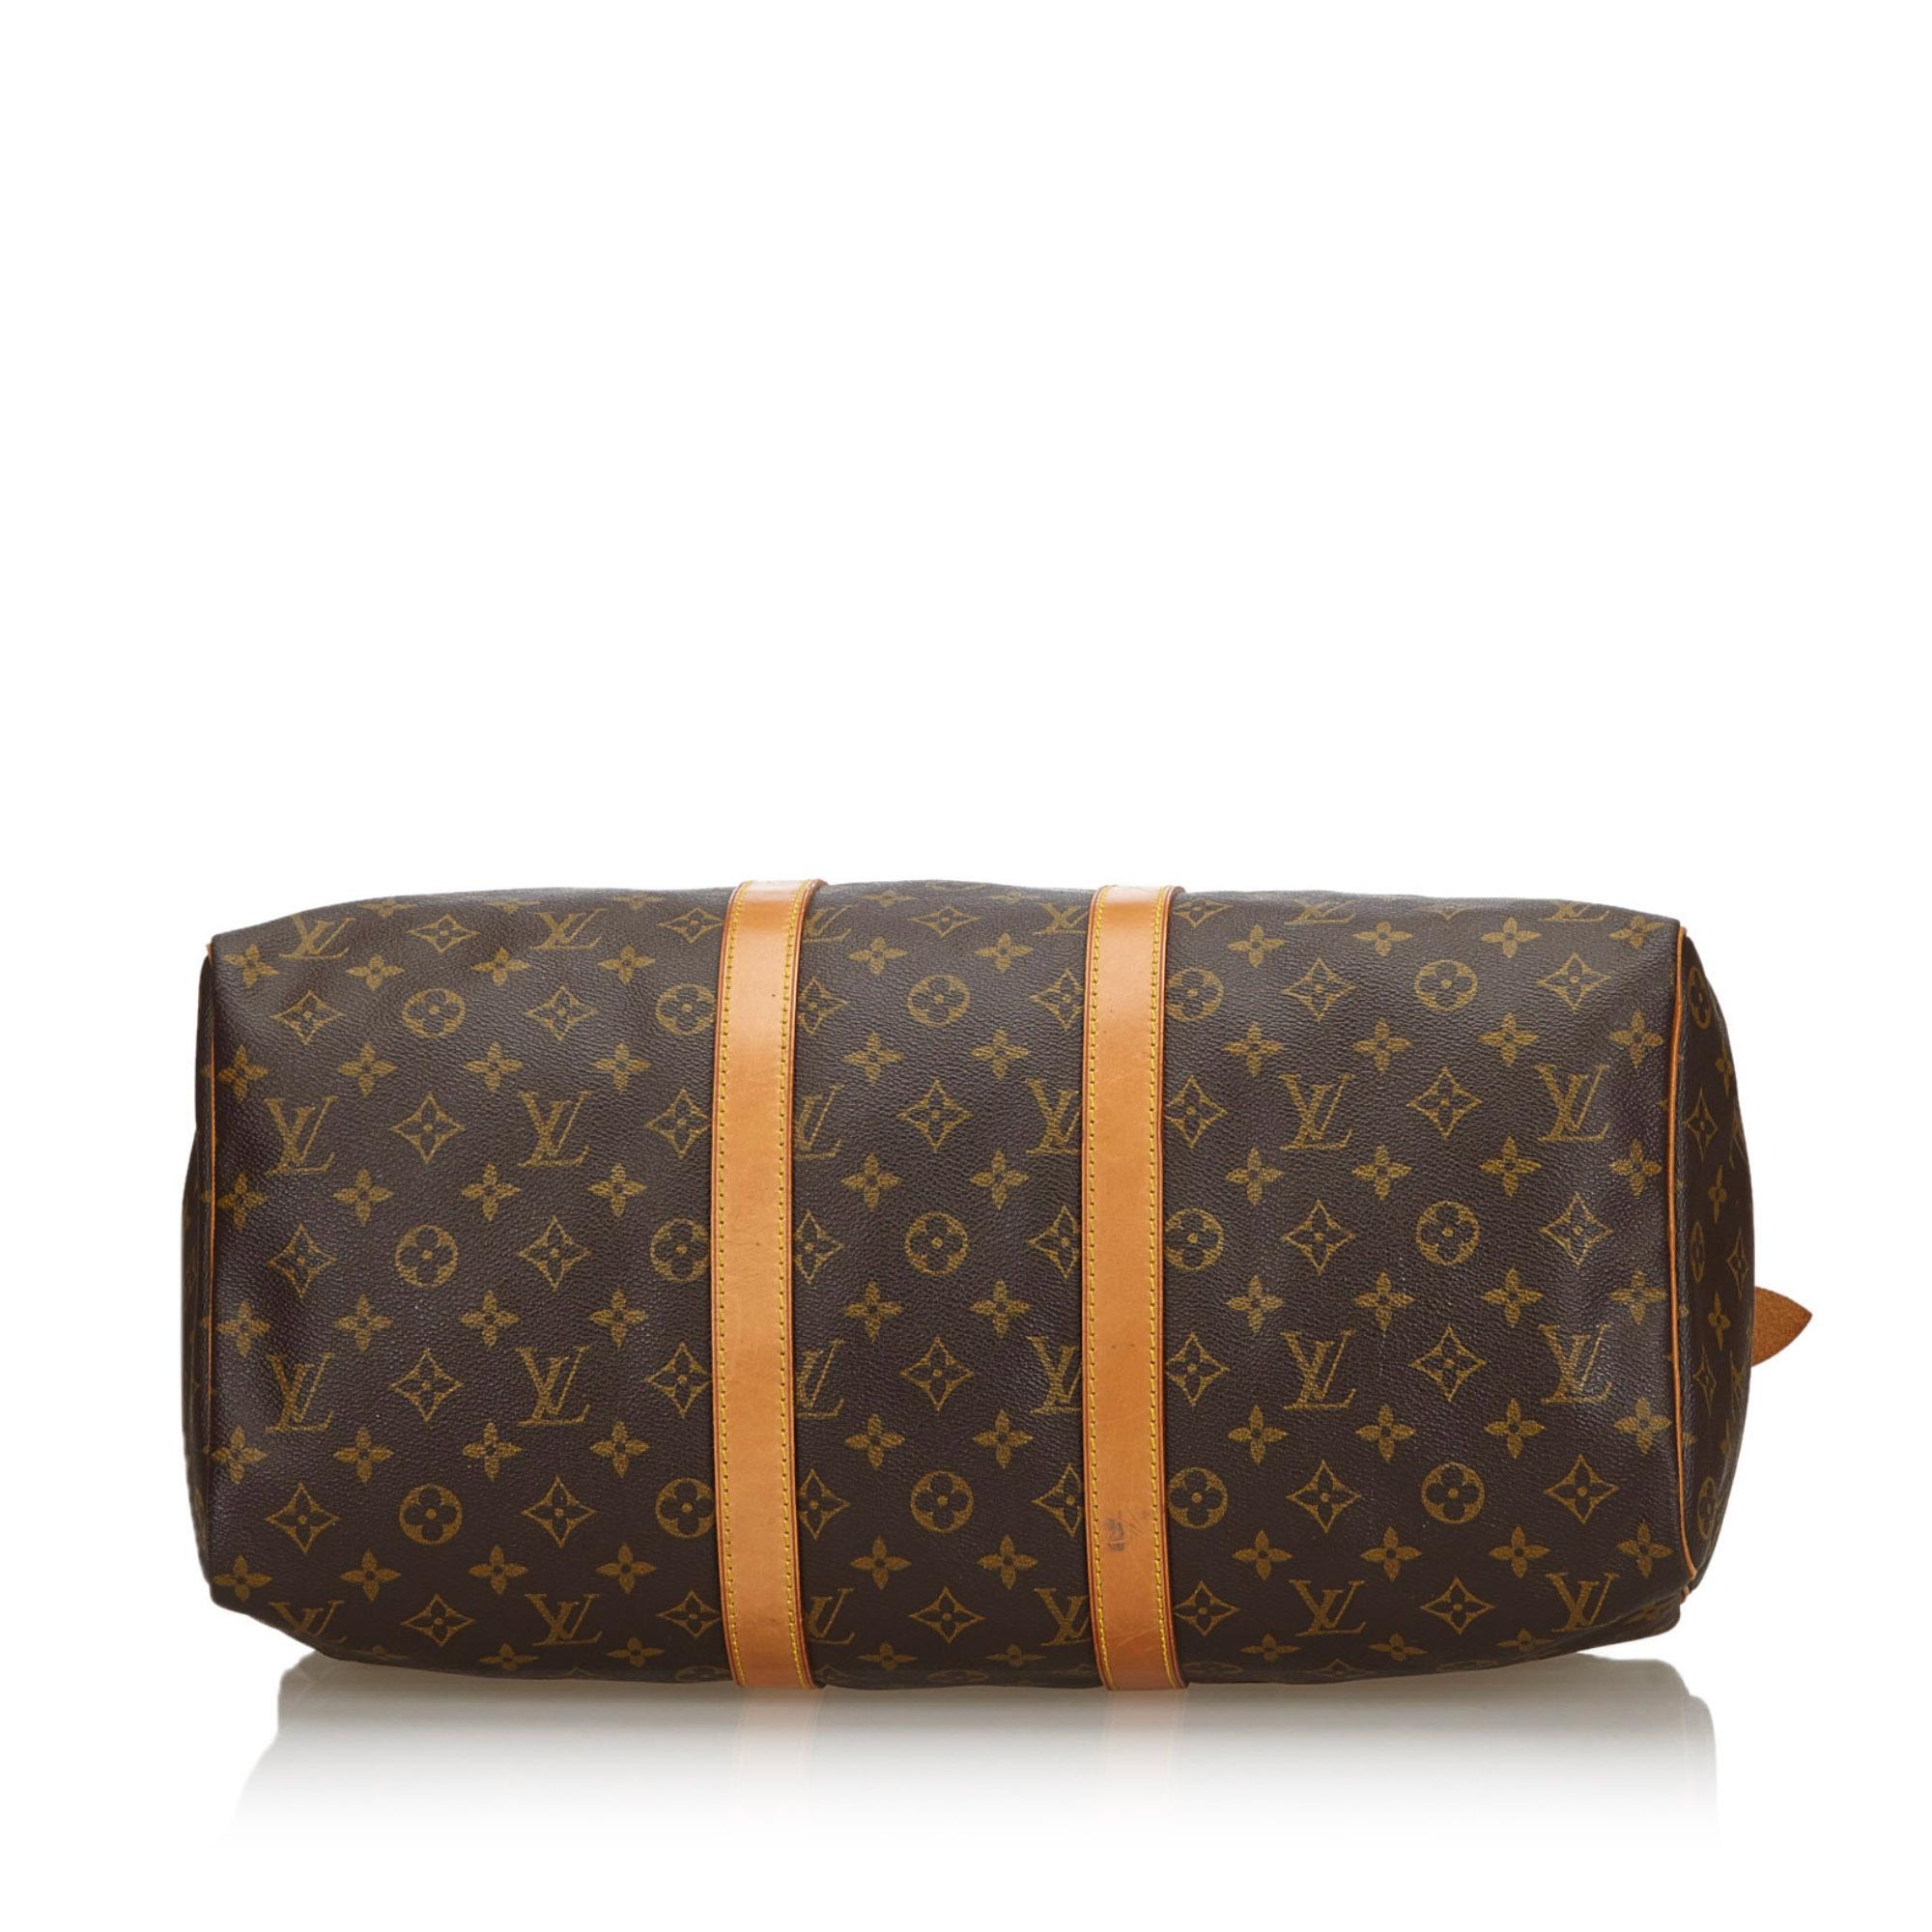 Vintage Authentic Louis Vuitton Brown Monogram Canvas Keepall 45 France LARGE  In Good Condition For Sale In Orlando, FL